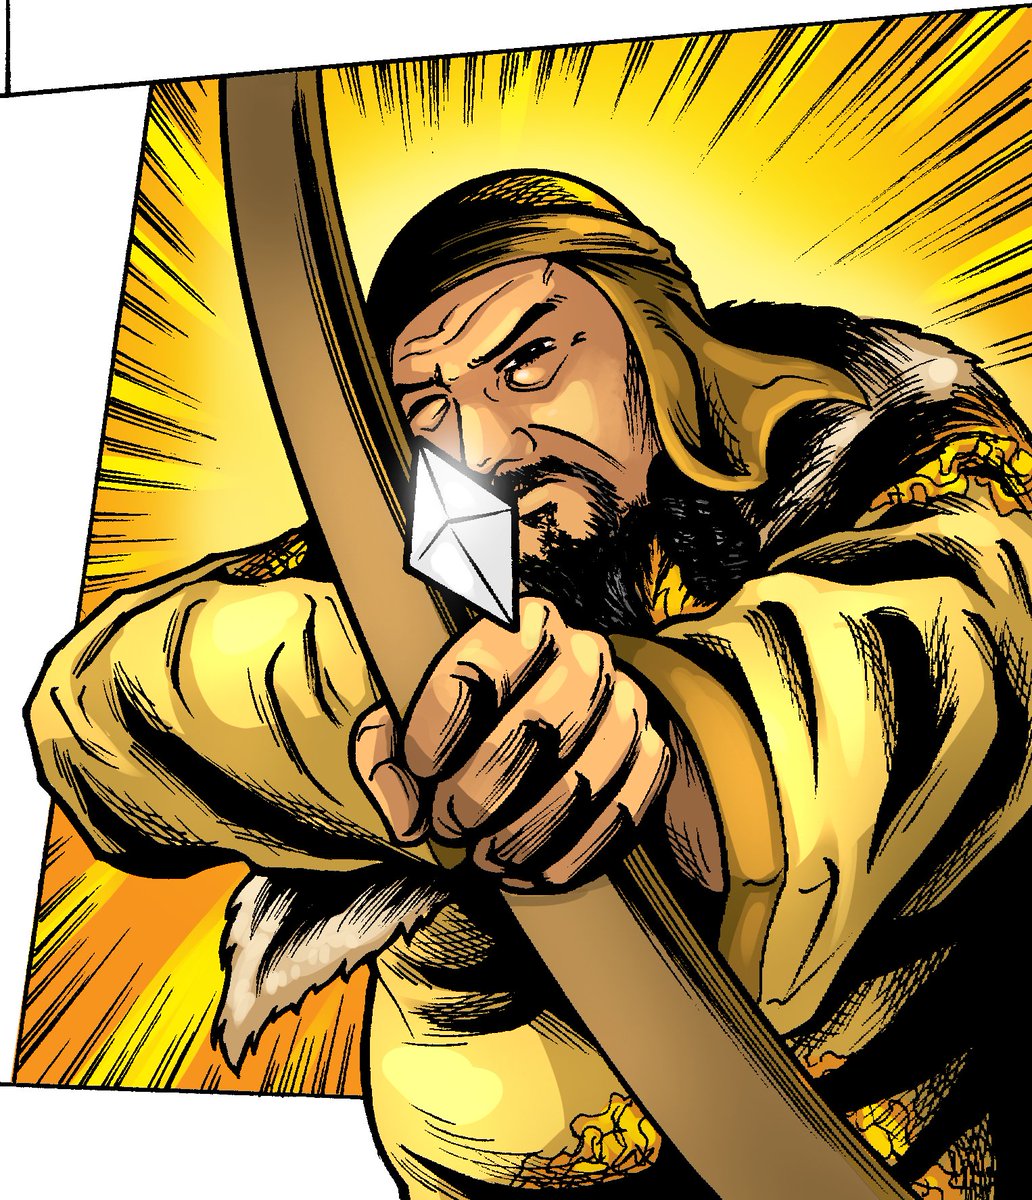 The Yekhe Khagan is definitely not someone you'd want to mess with. 

Only 4 days left on the clock. Back us on Kickstarter before it's too late!

kickstarter.com/projects/chira…
--------------------
#wuxia #comic #comics #graphicnovel #comicbook #kickstartercomic #Kickstarter